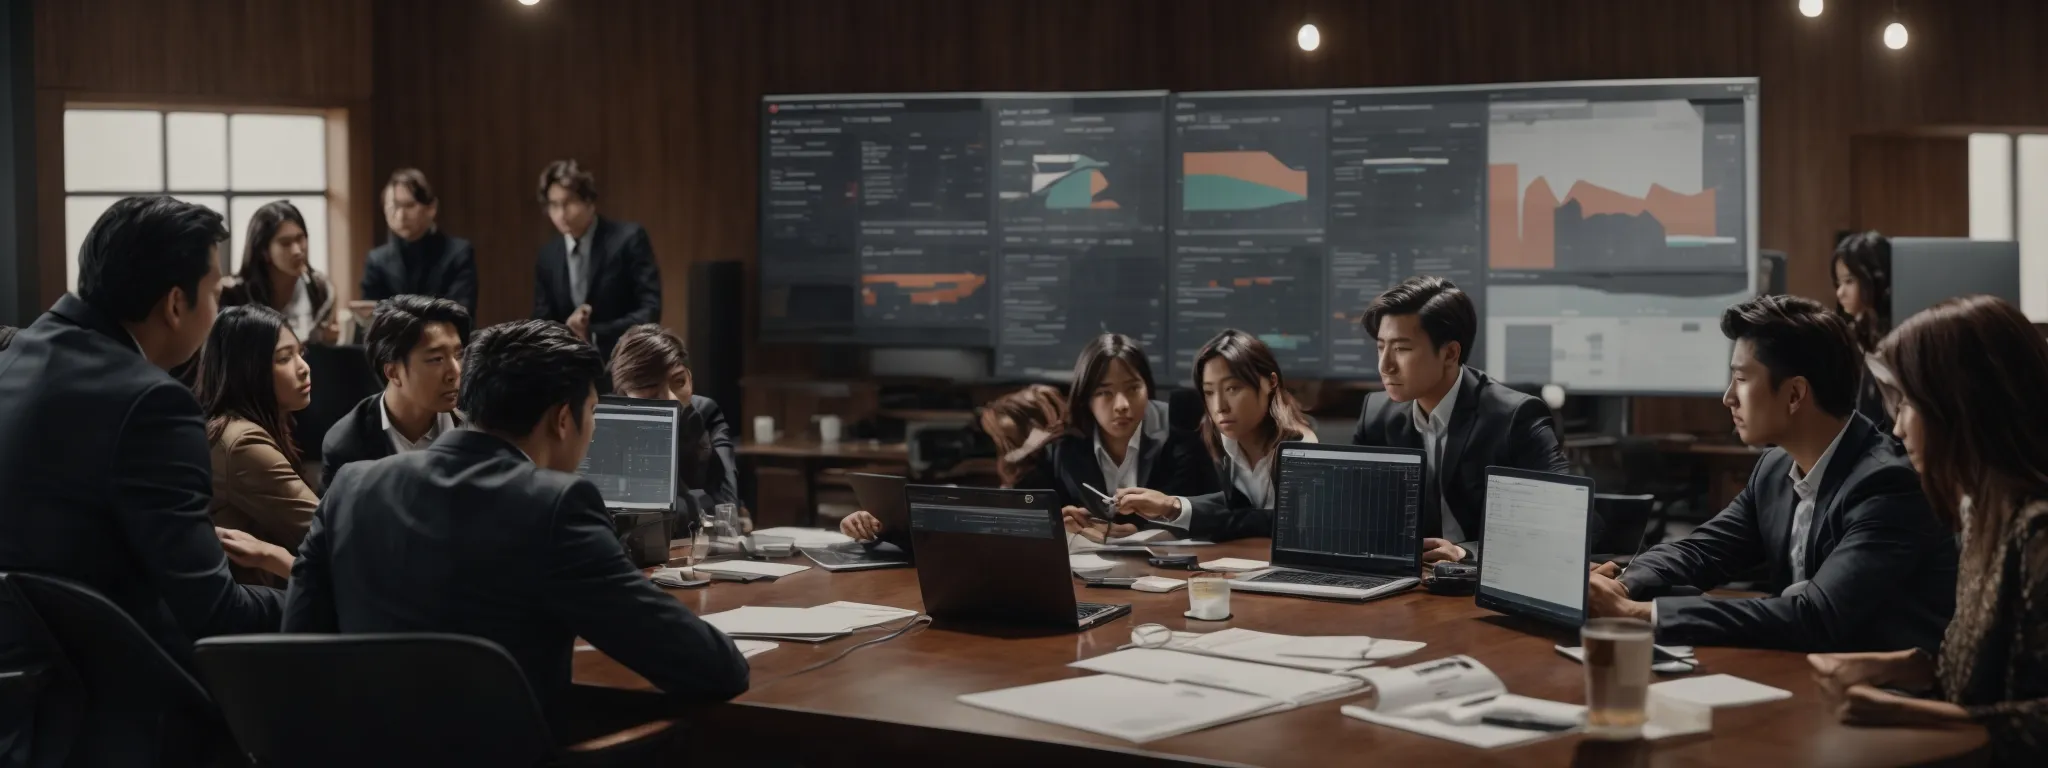 a team actively engages in a strategy session around a large table equipped with computers and marketing reports under a bold infographic titled 